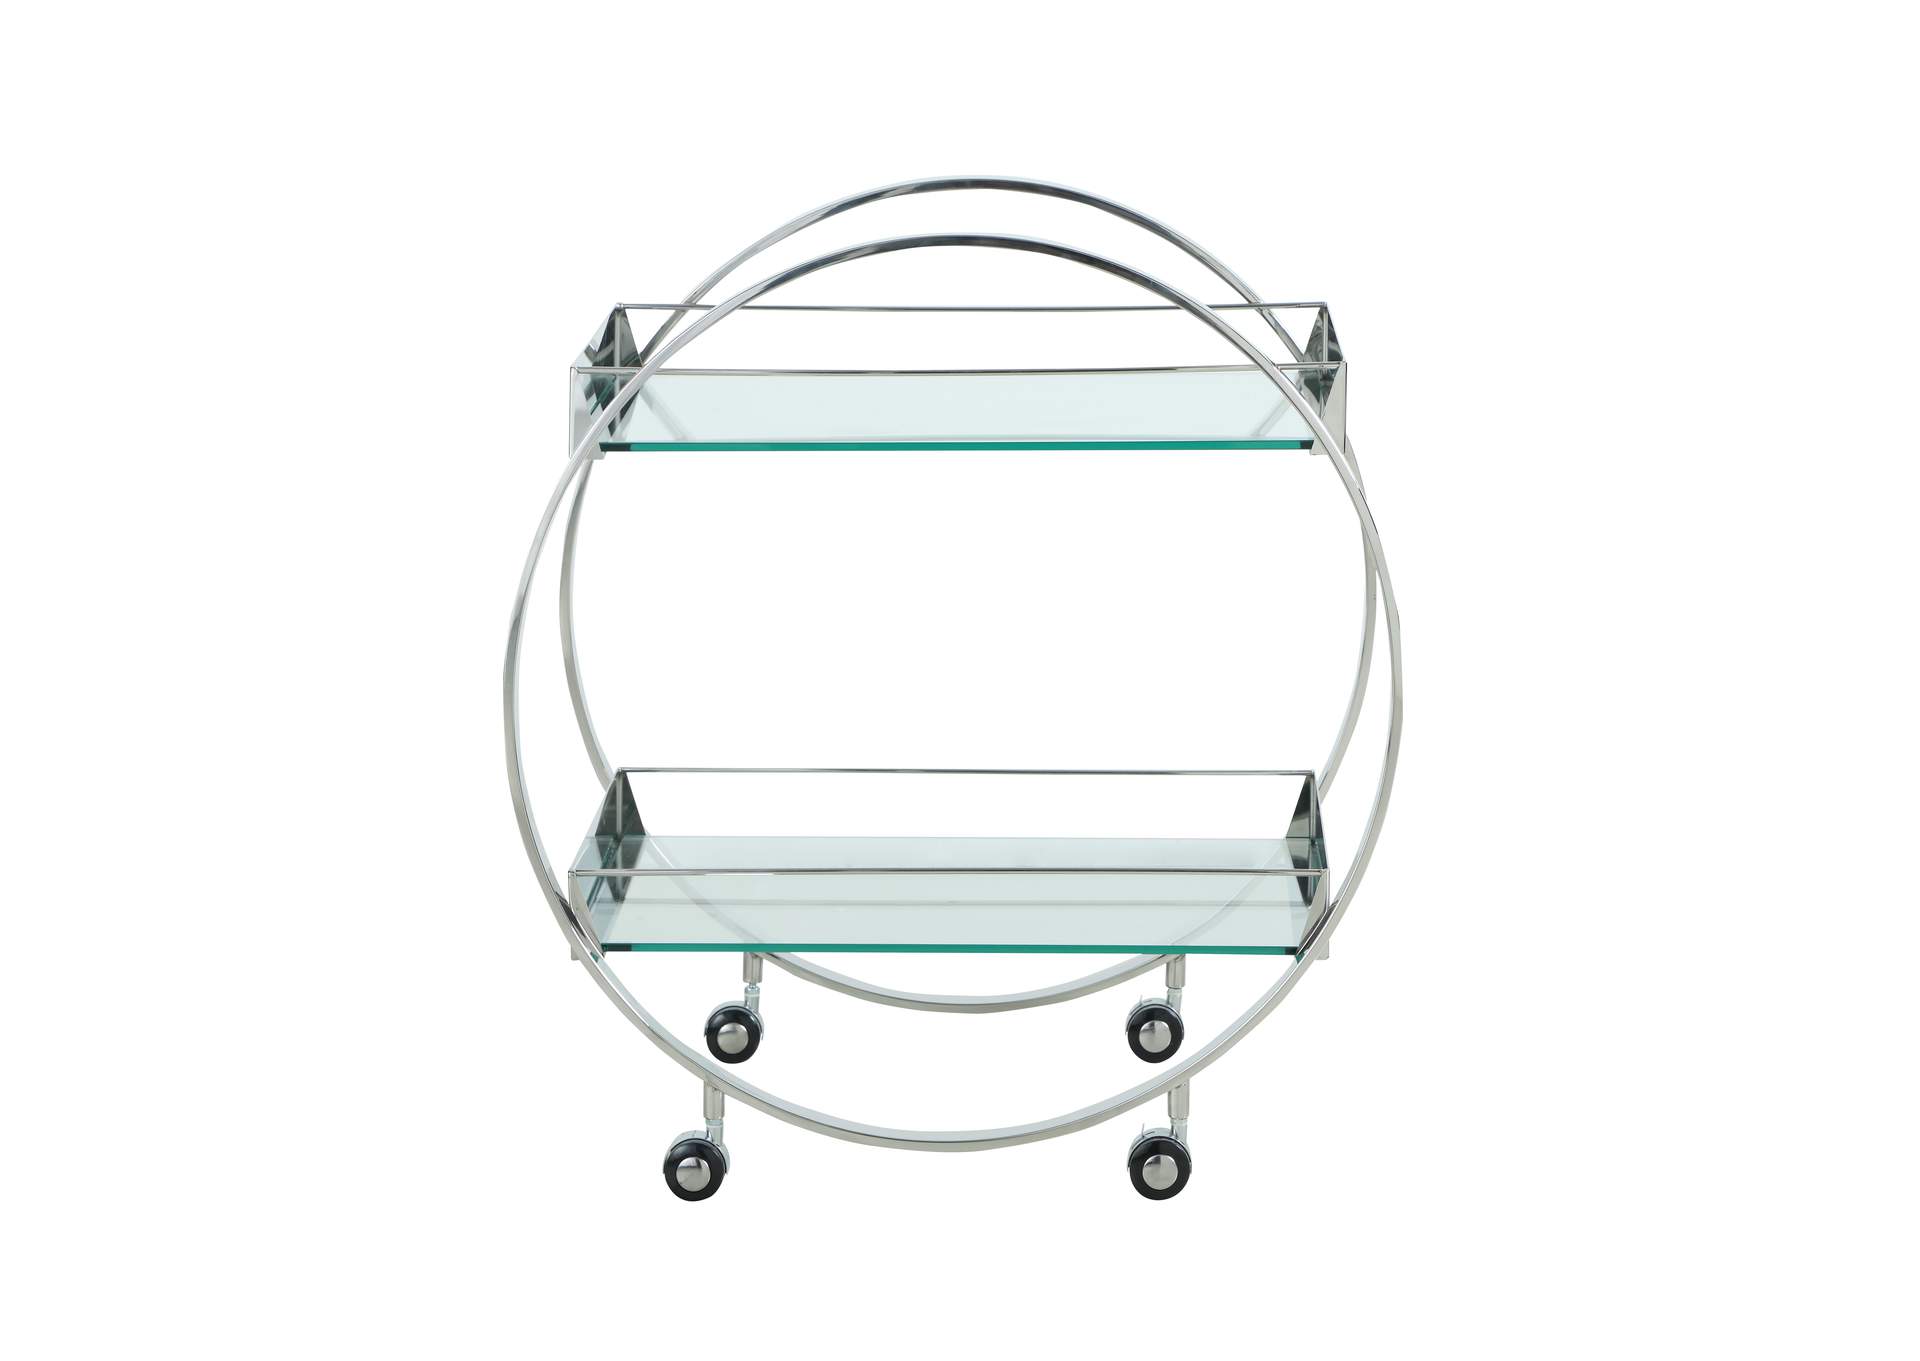 Contemporary Circular Tea Cart With Glass Shelves,Chintaly Imports